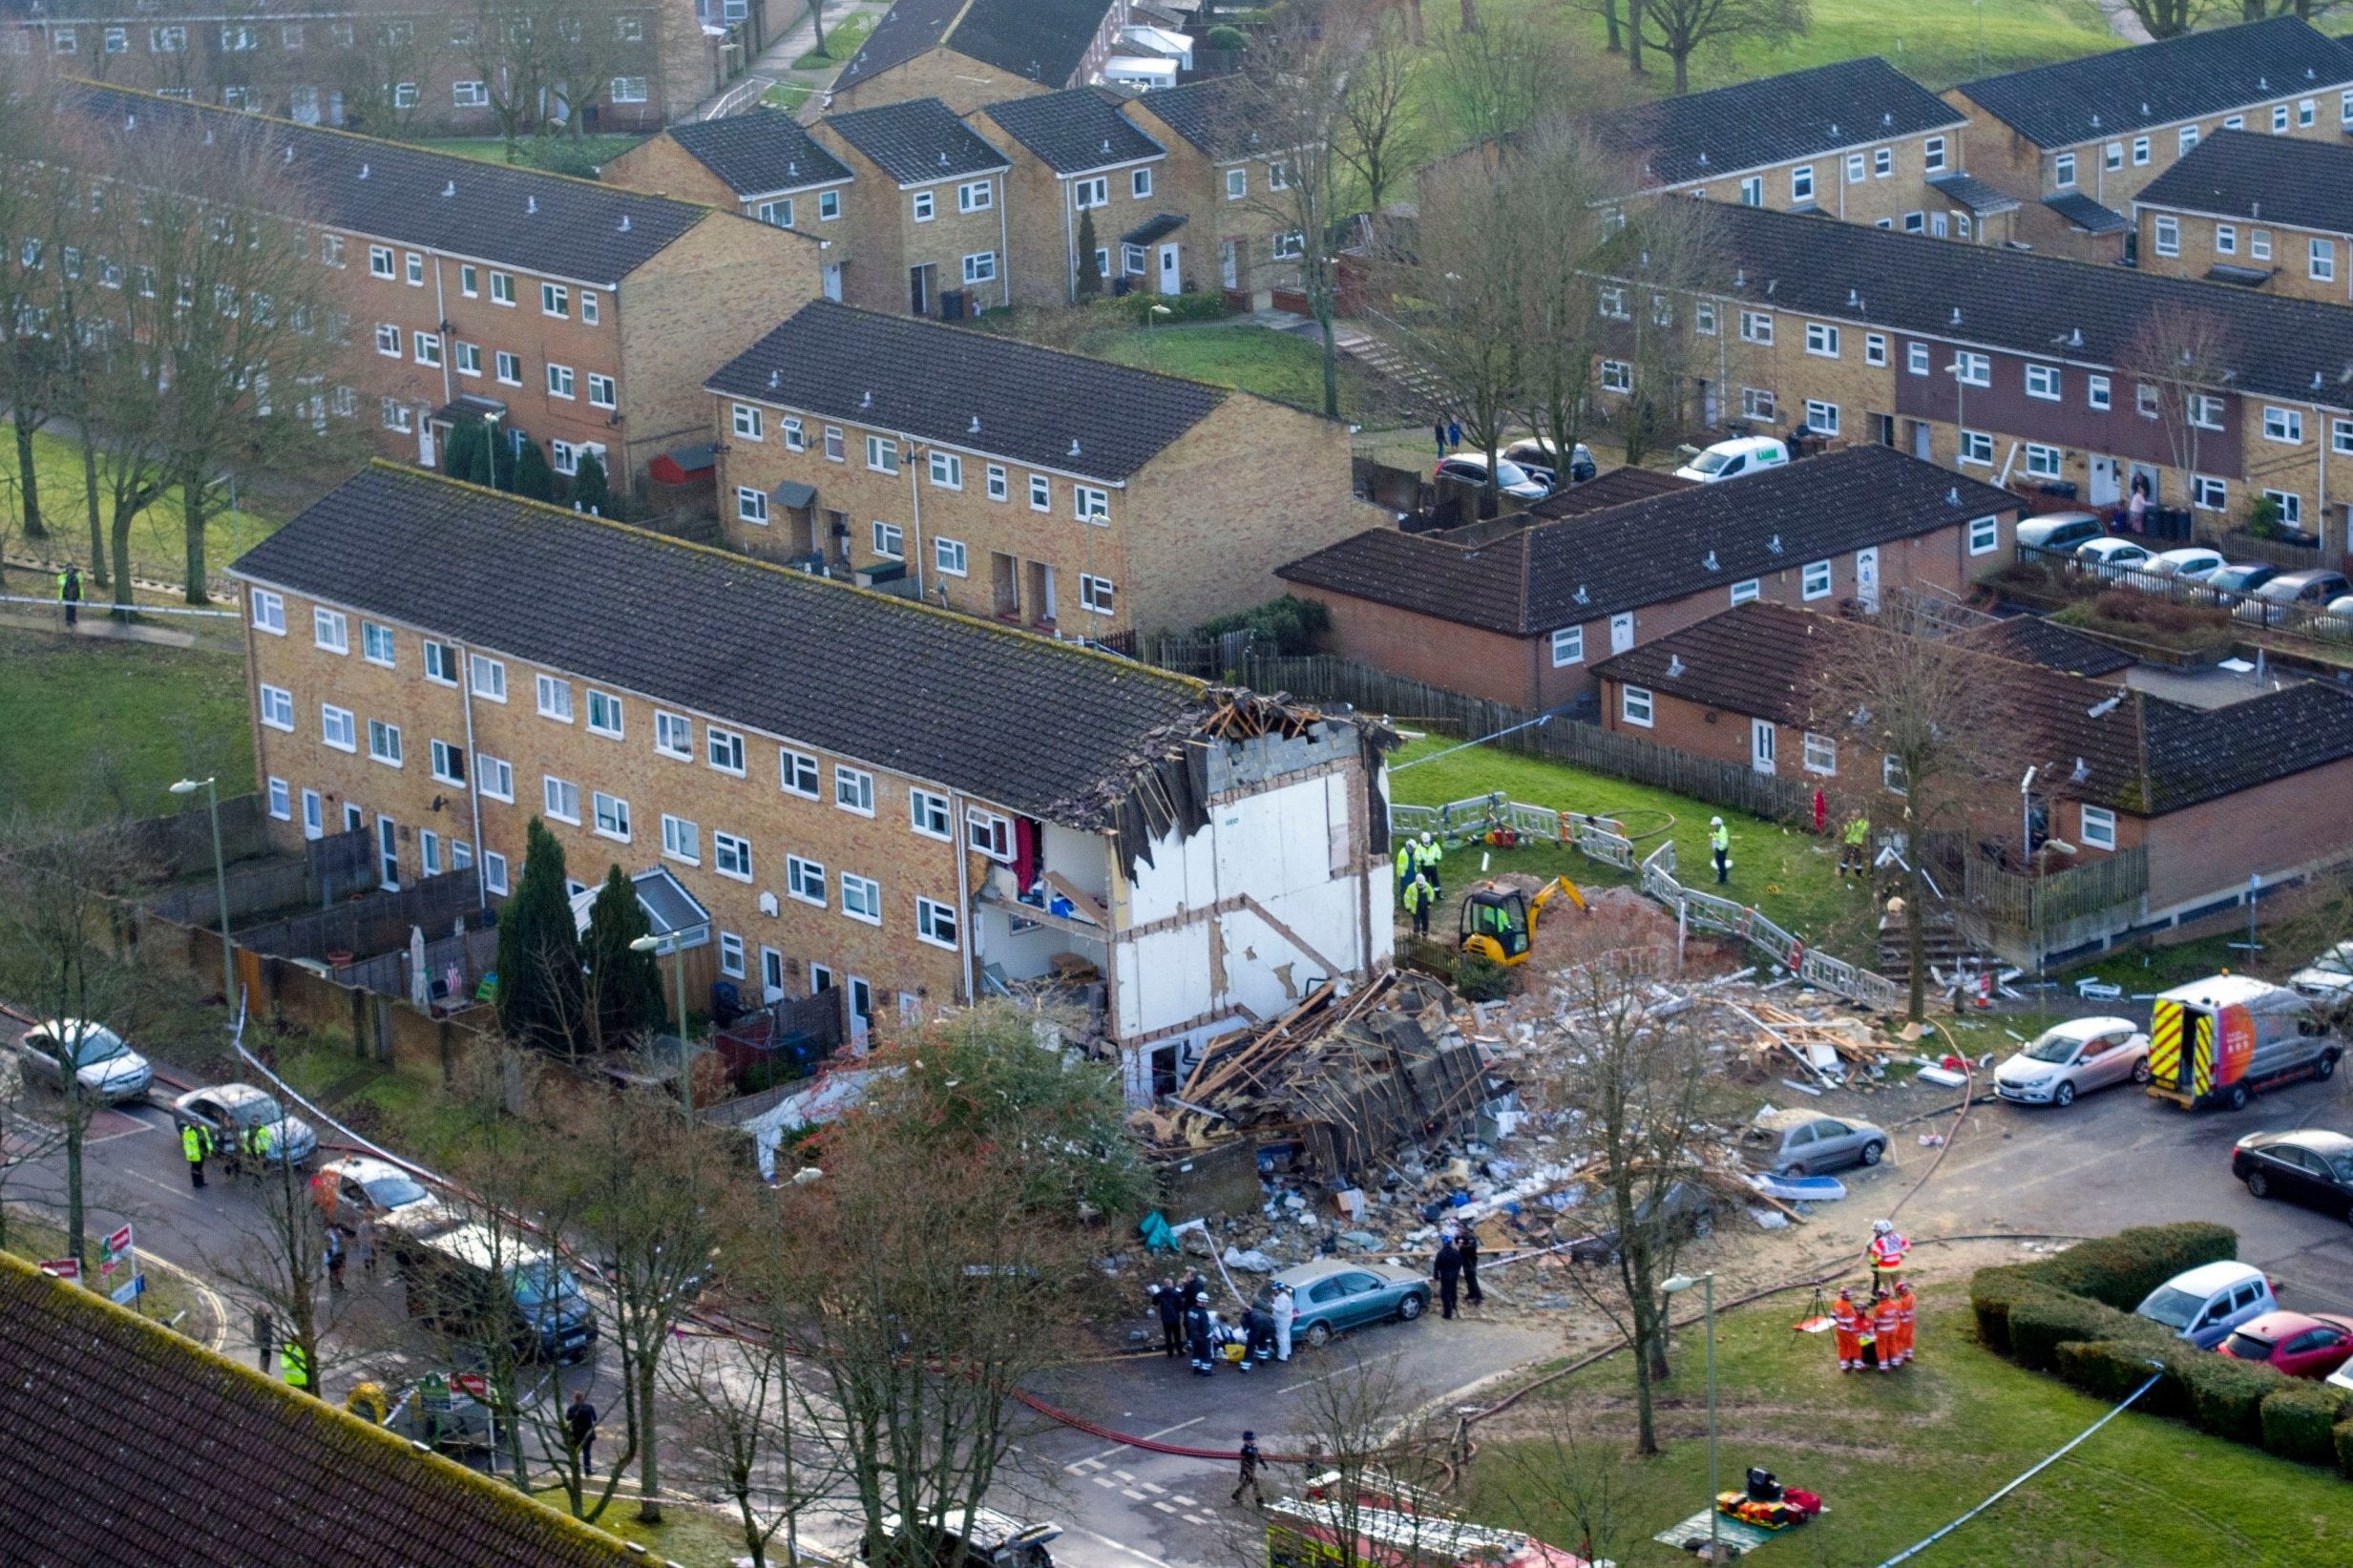 &#13;
An aerial view of a house in Launcelot Close, Andover, where a man's body was found following a suspected gas explosion &#13;